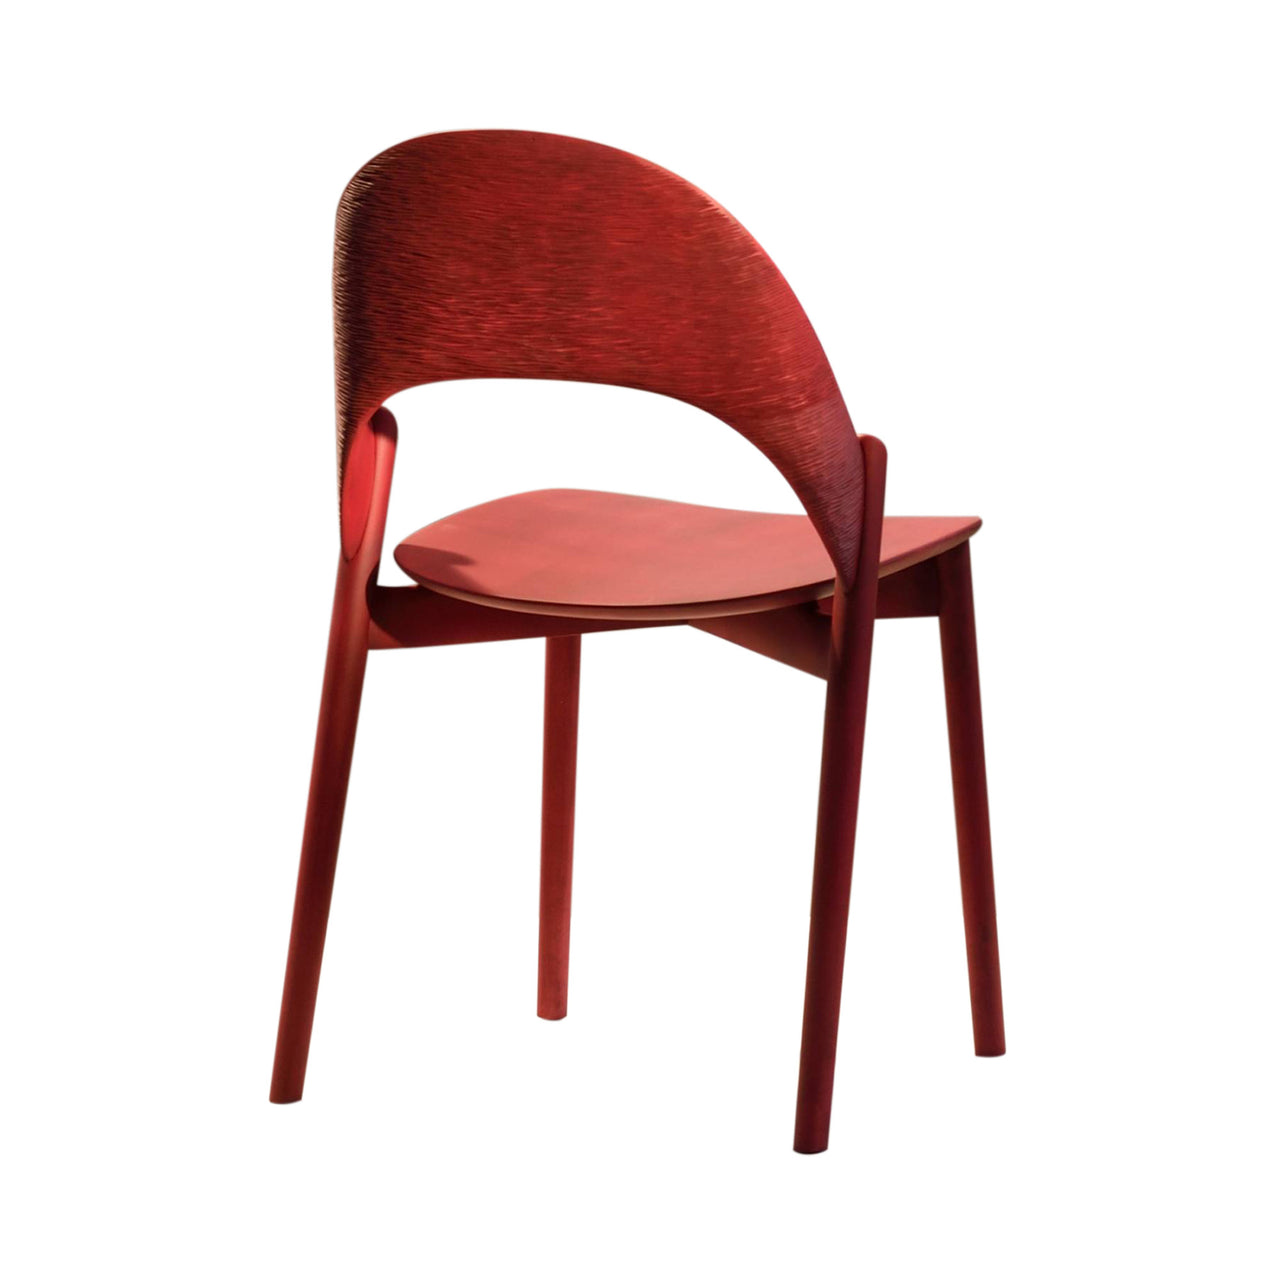 Sana Chair: Burgundy + Woven + Without Cushion